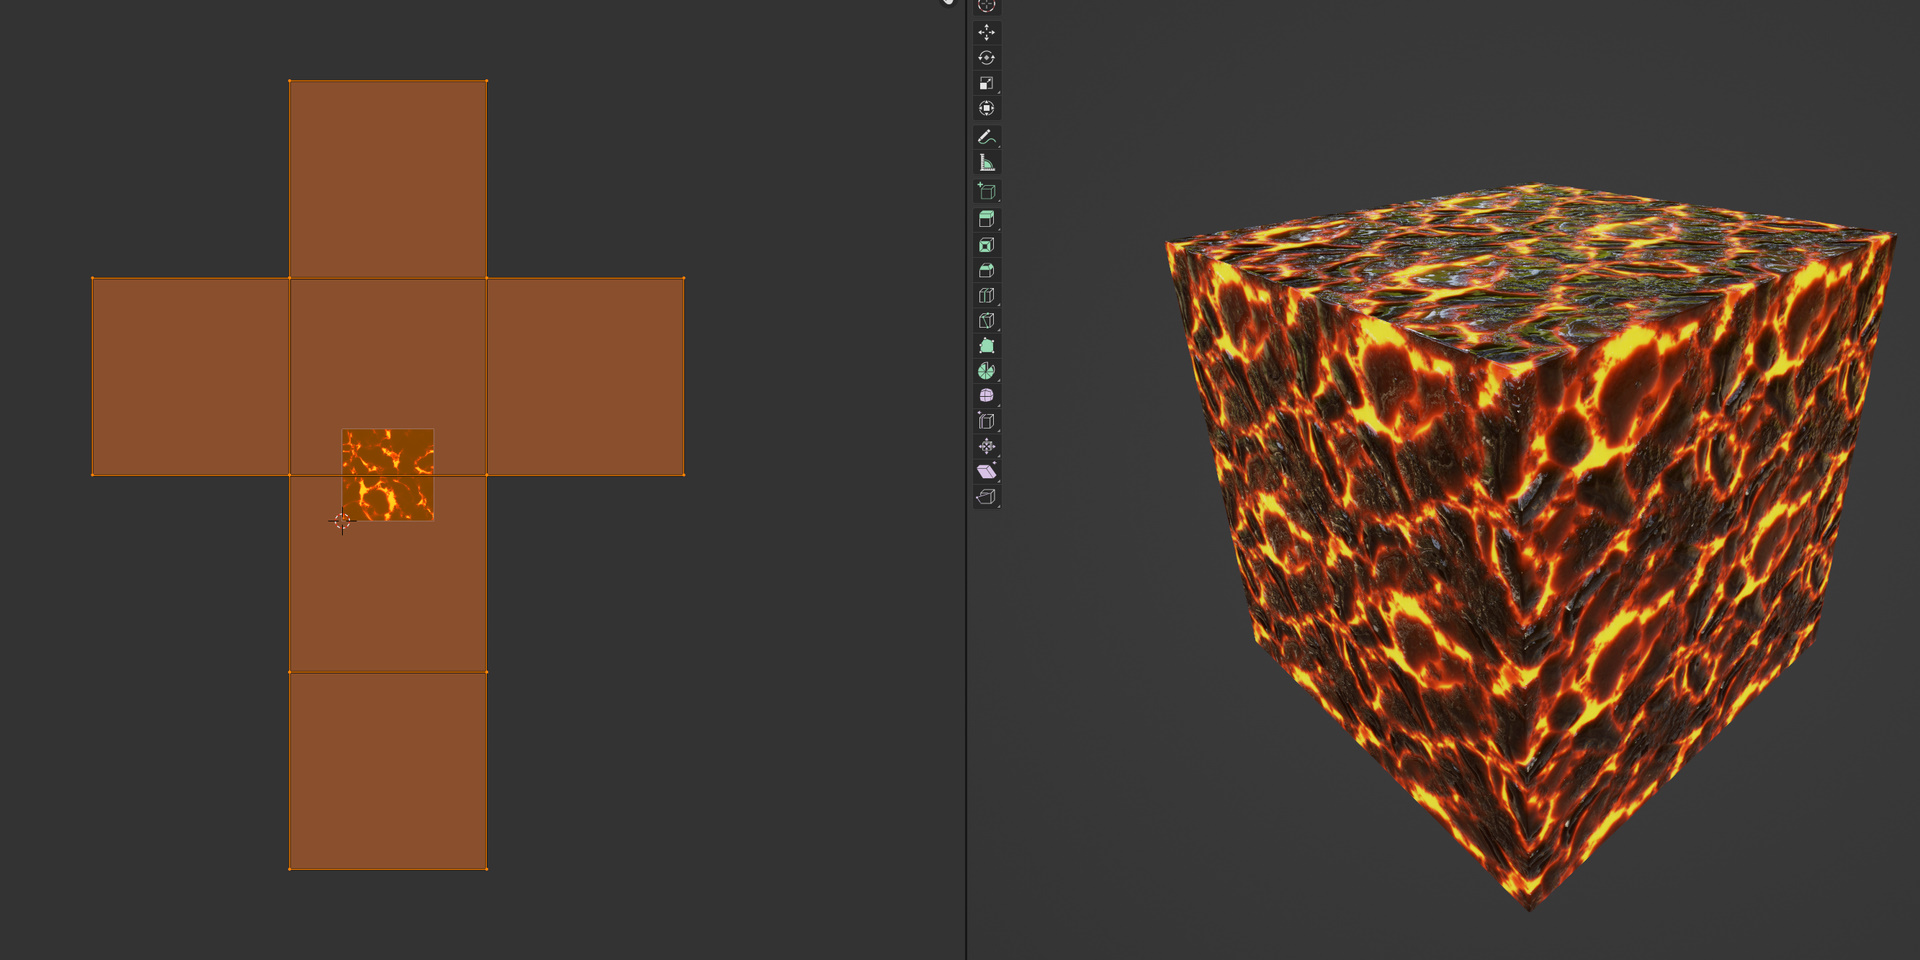 The same cube but the lava texture has shrunk and is now tiling across the surface. The UVs have been scaled beyond the bounds of the UV area.